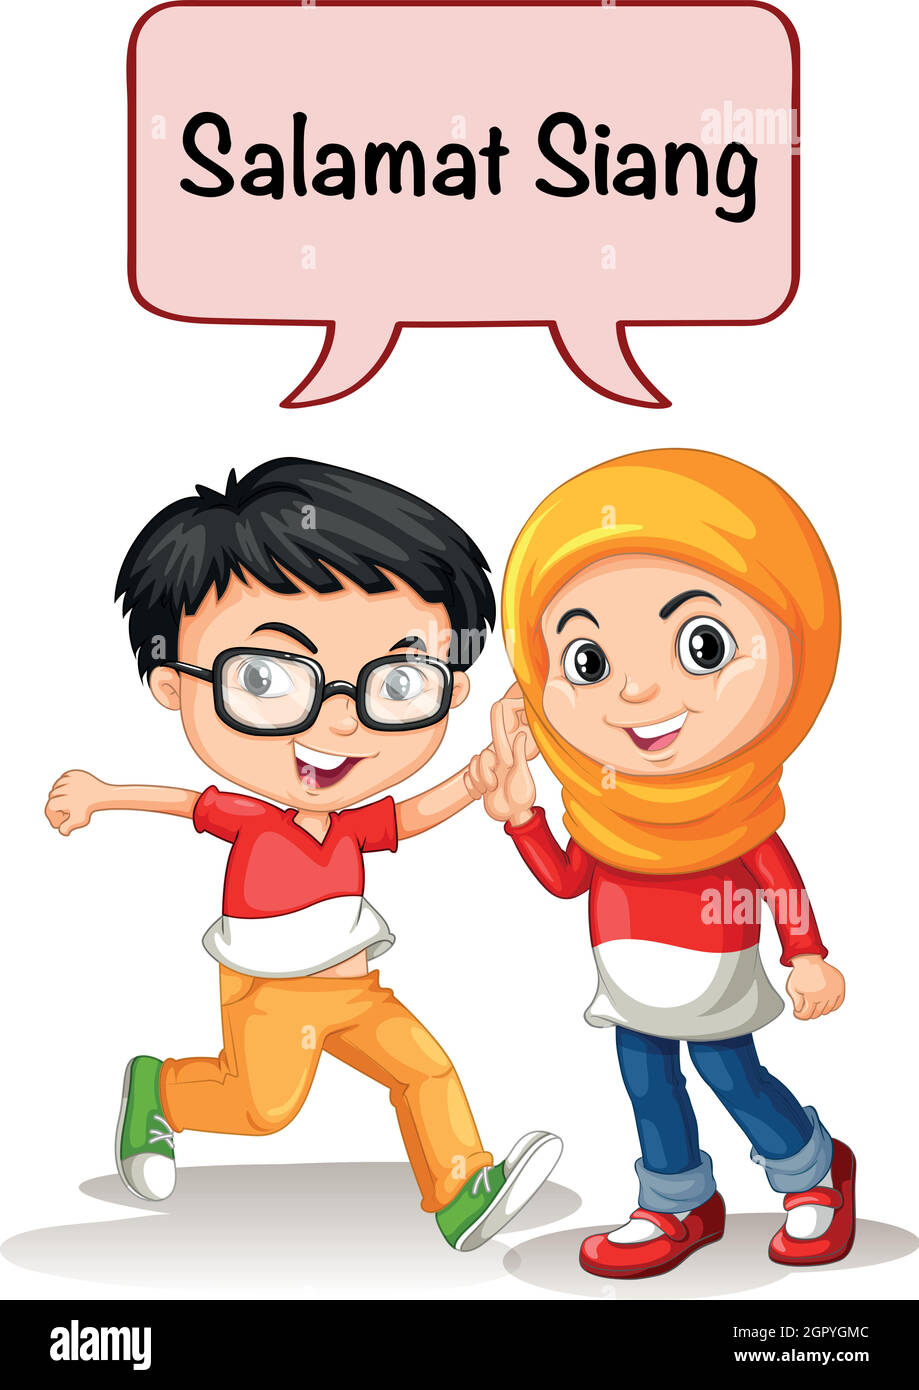 Boy and girl greeting in indonesian language Stock Vector